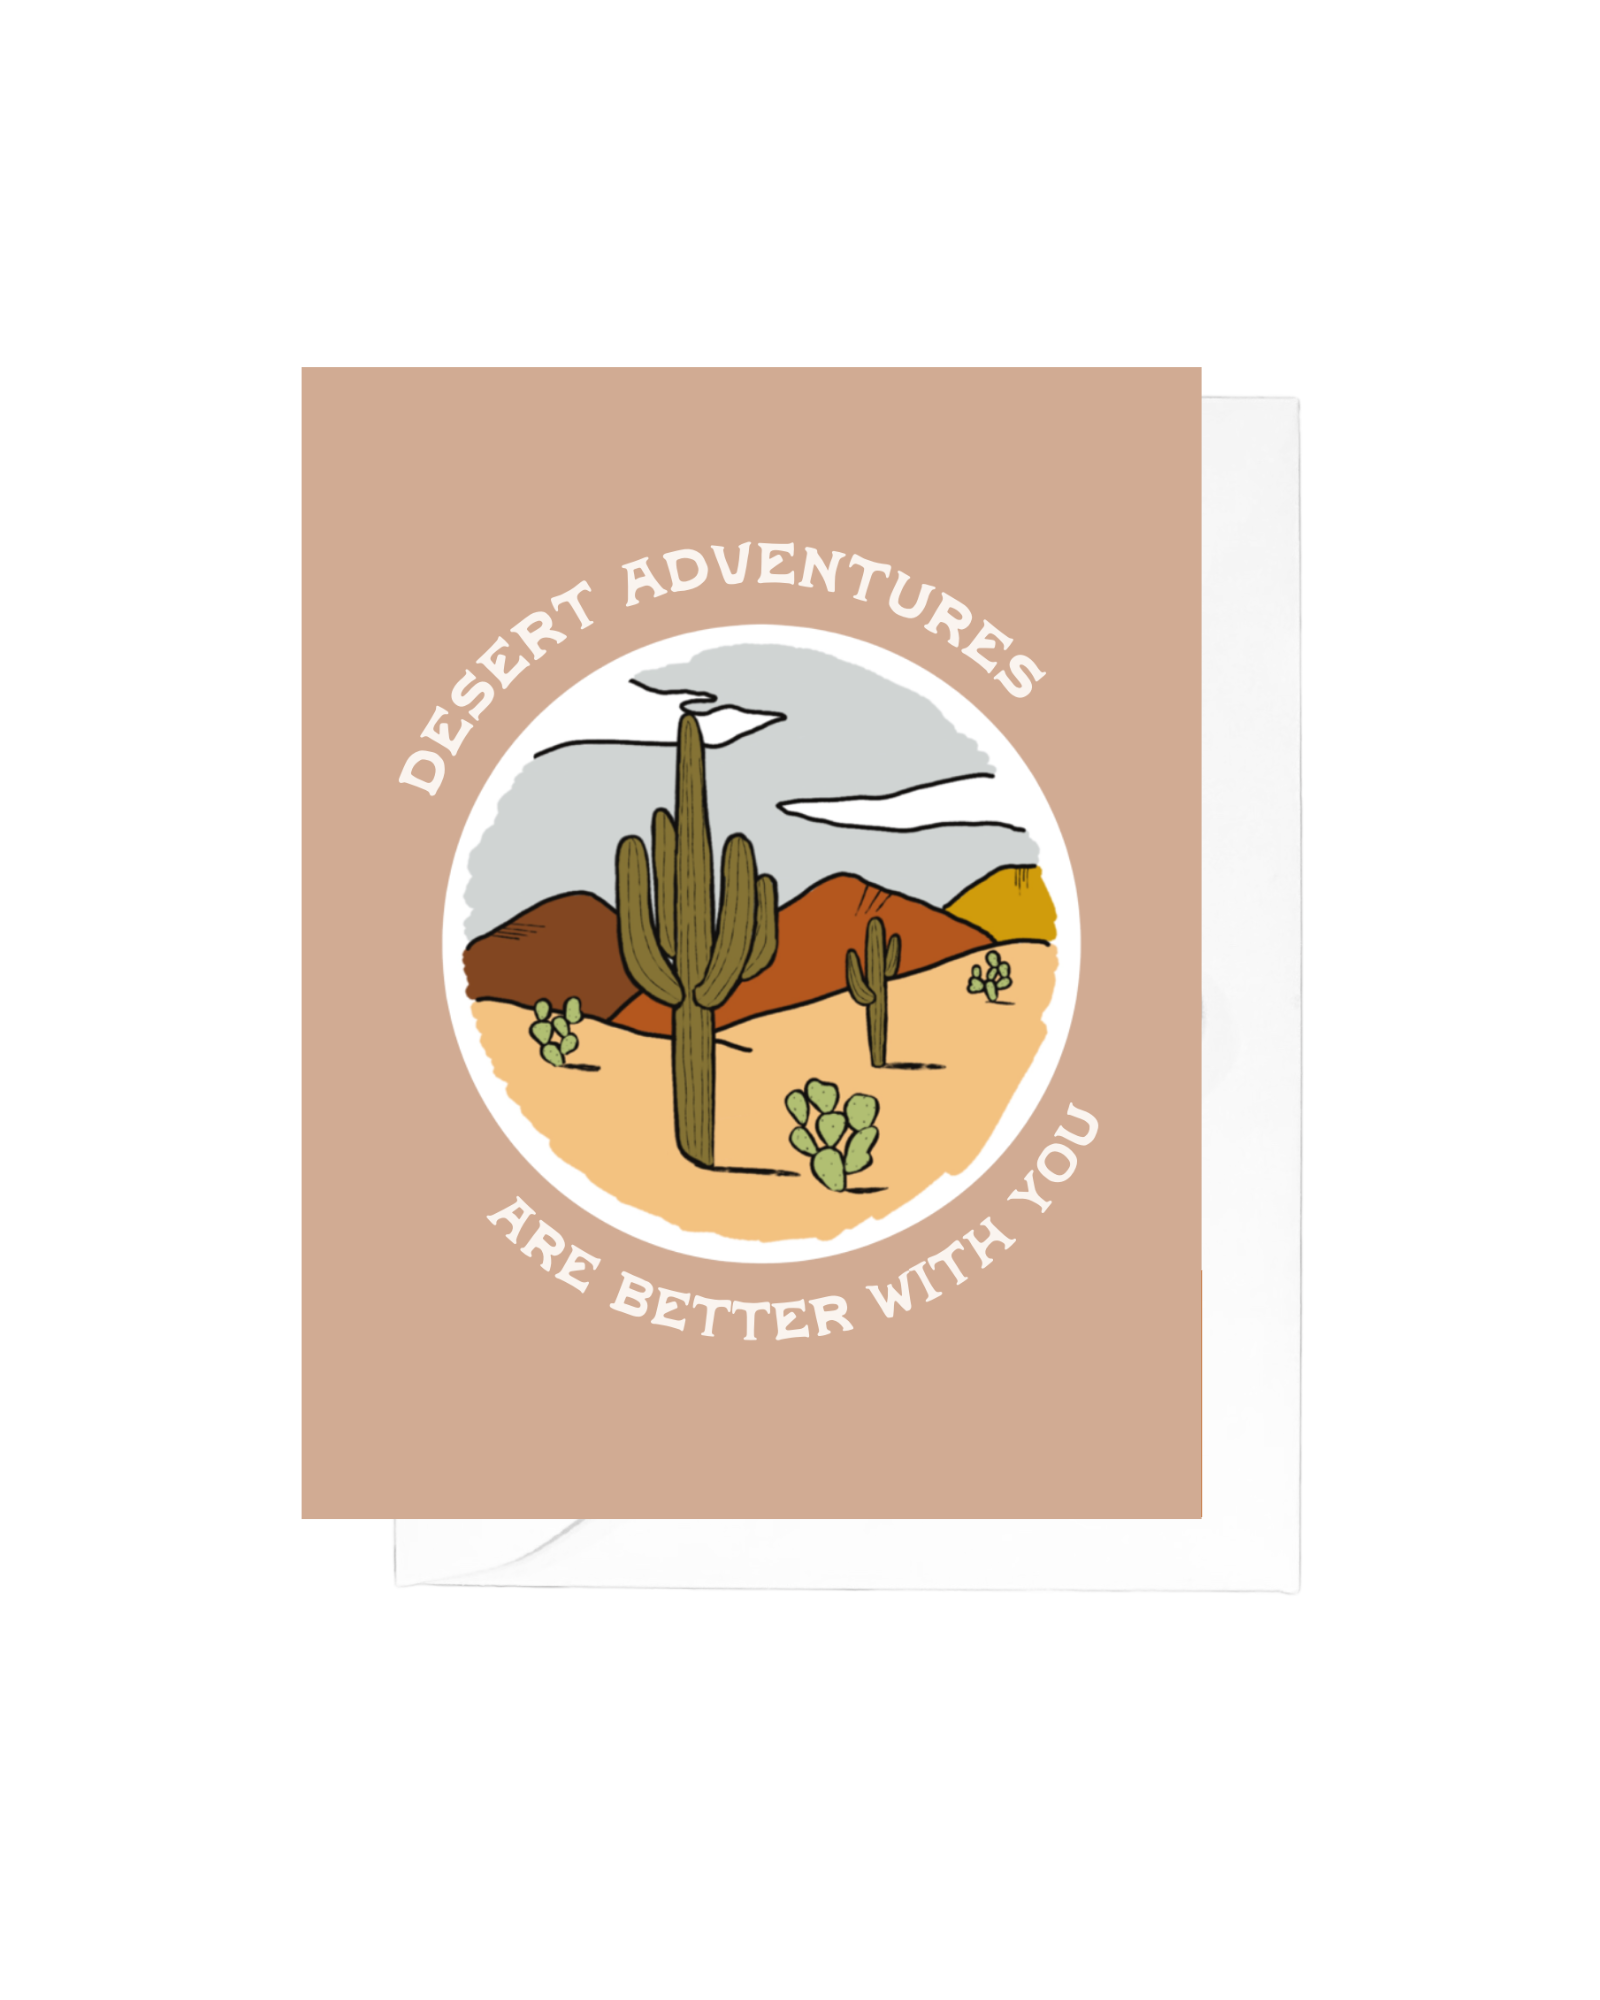 Tan greeting card with a circle containing a desert landscape and the words "desert adventures are better with you"